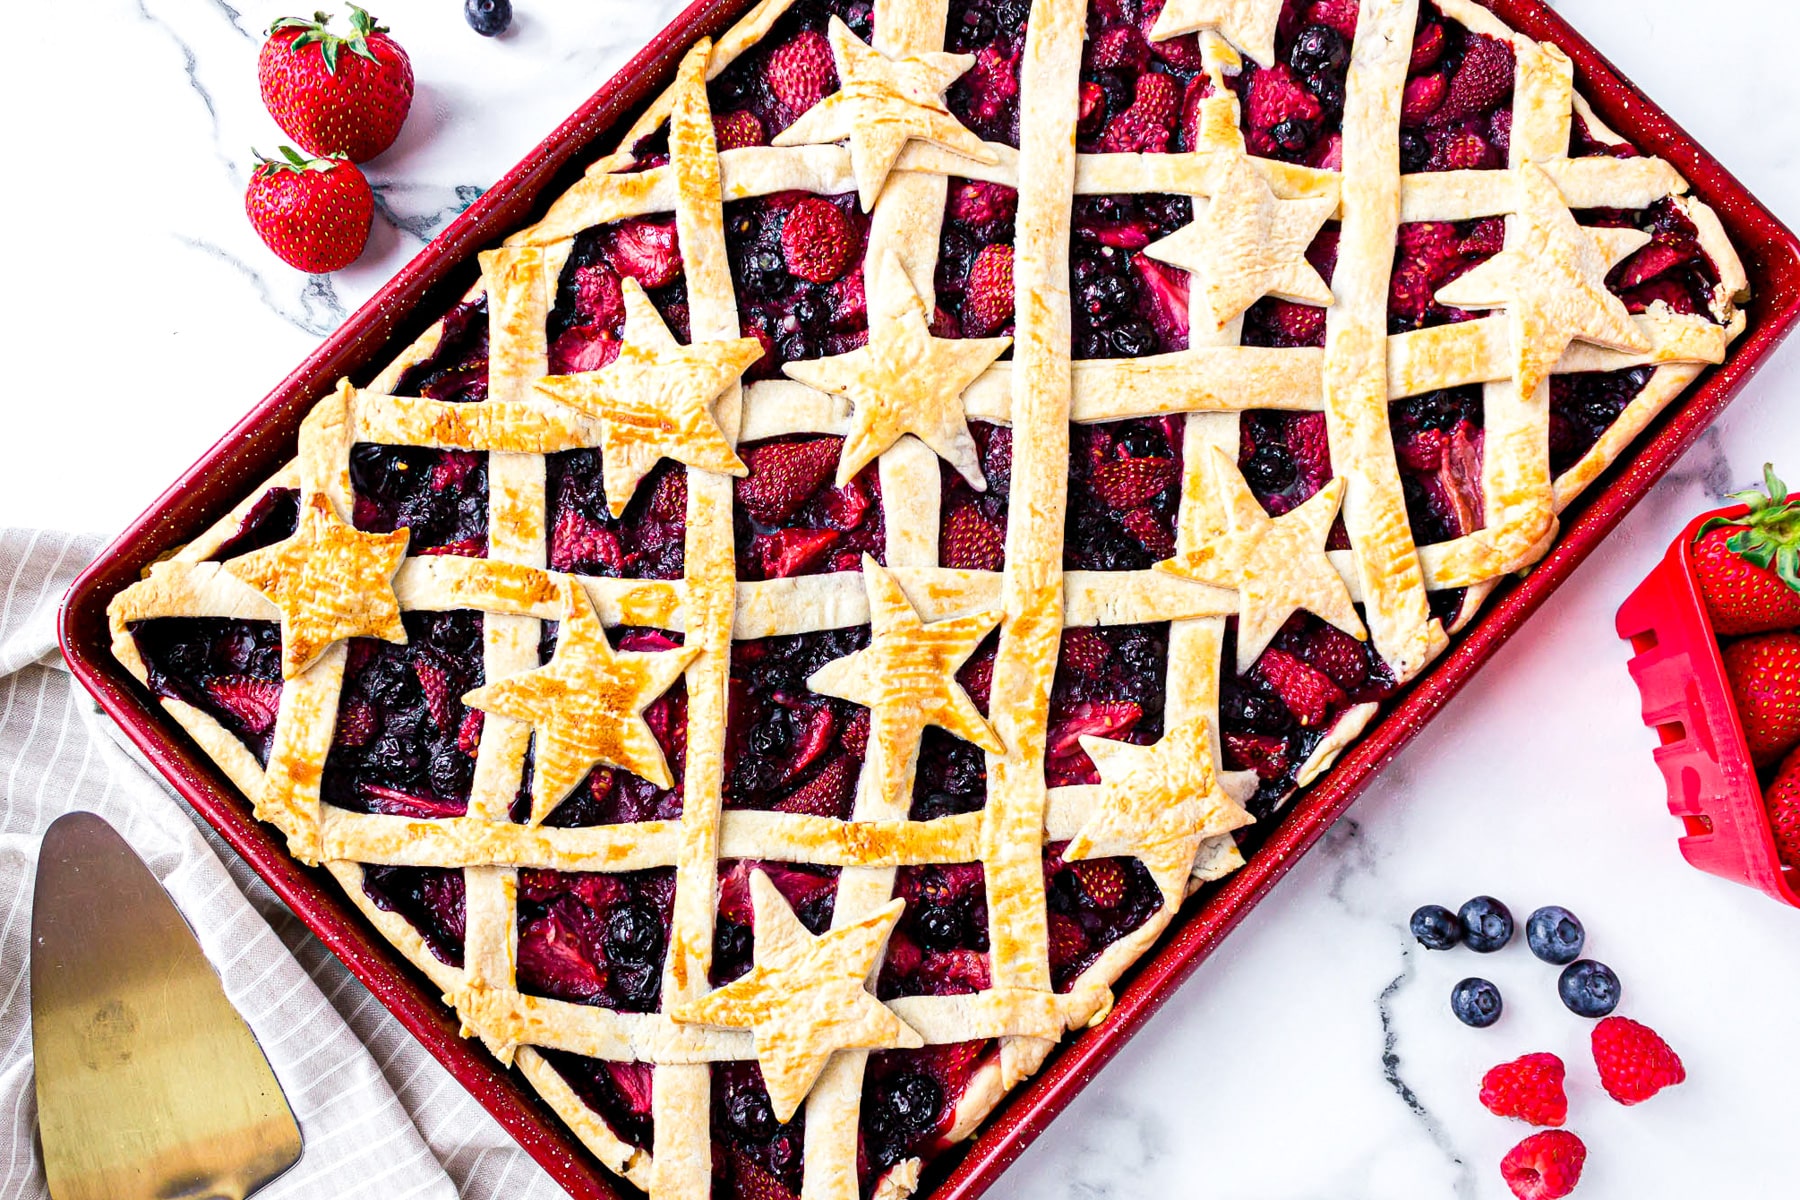 mixed berry slab pie on sheet decorated with stars.